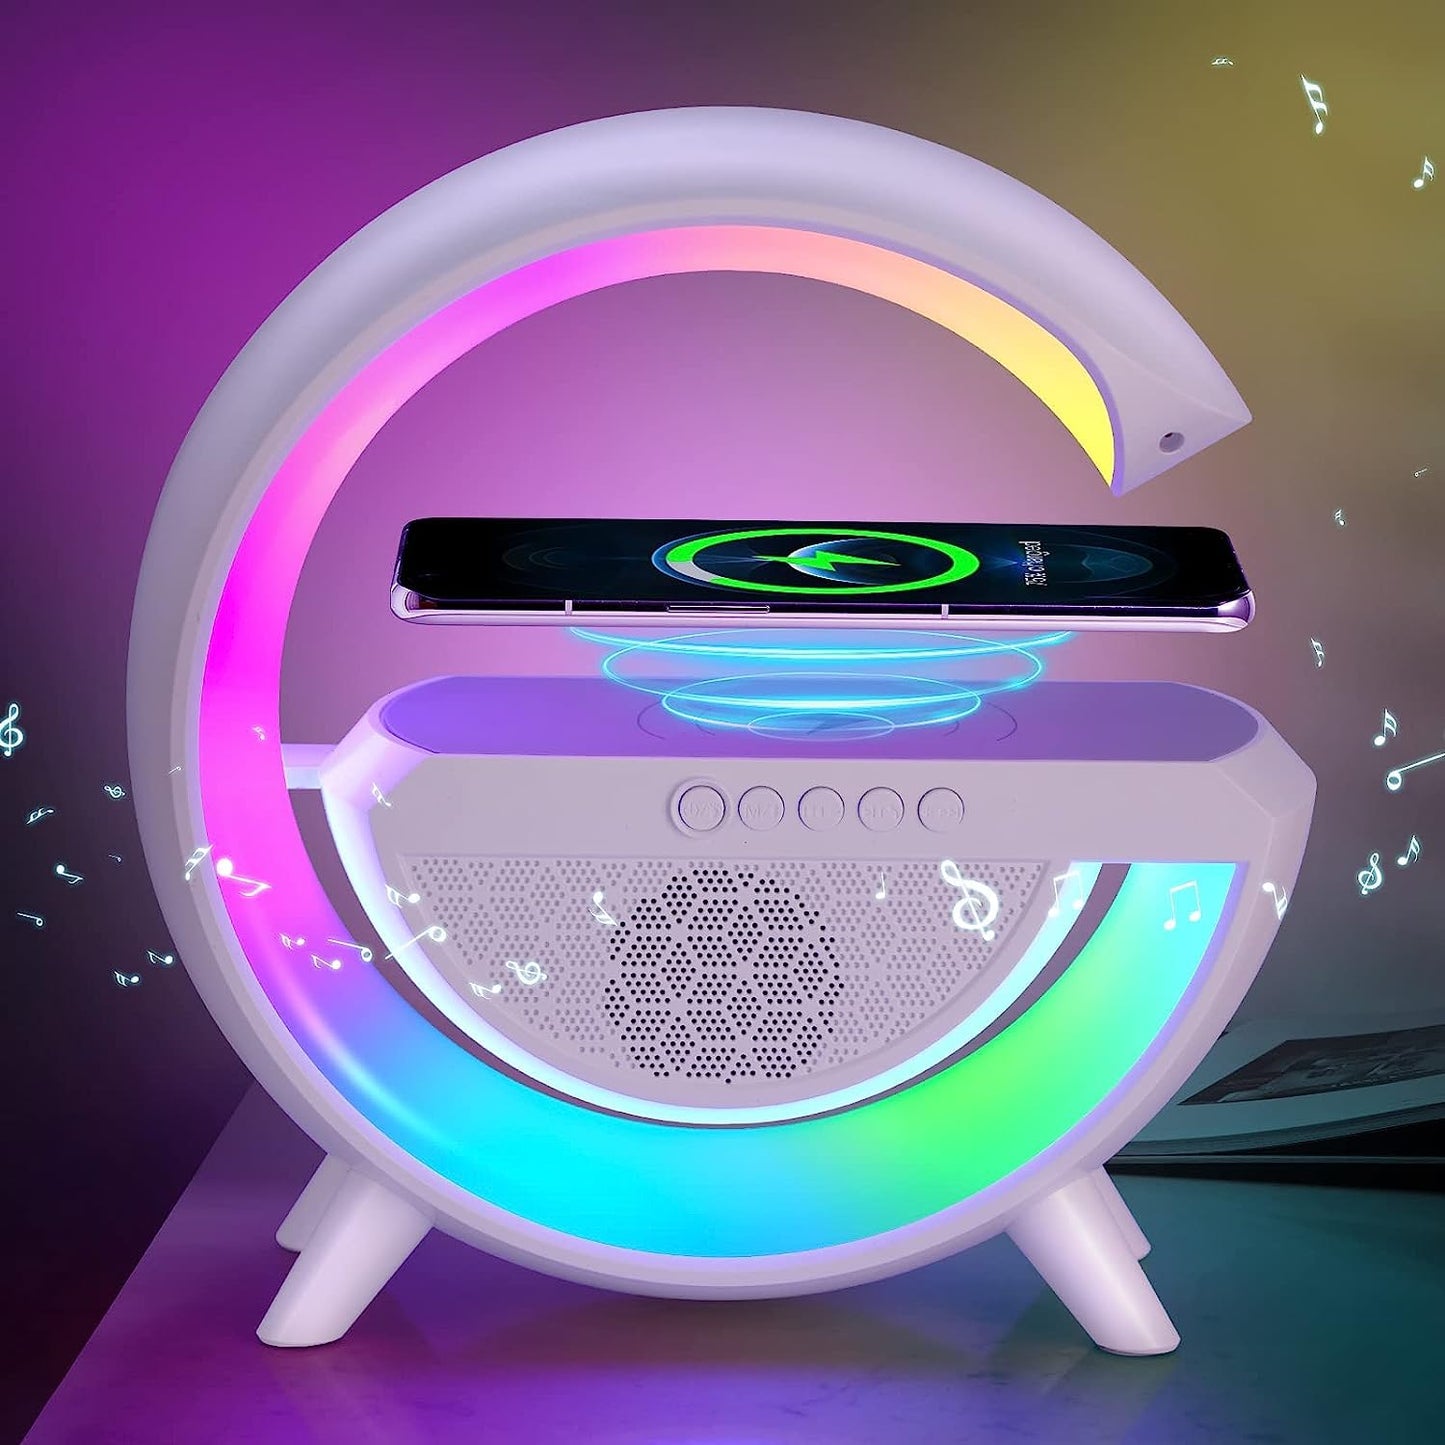 1393   3-in-1 Multi-Function LED Night Lamp with Bluetooth Speaker, Wireless Charging, for Bedroom for Music, Party and Mood Lighting - Perfect Gift for All Occasions blootuth speaker (Media Player)